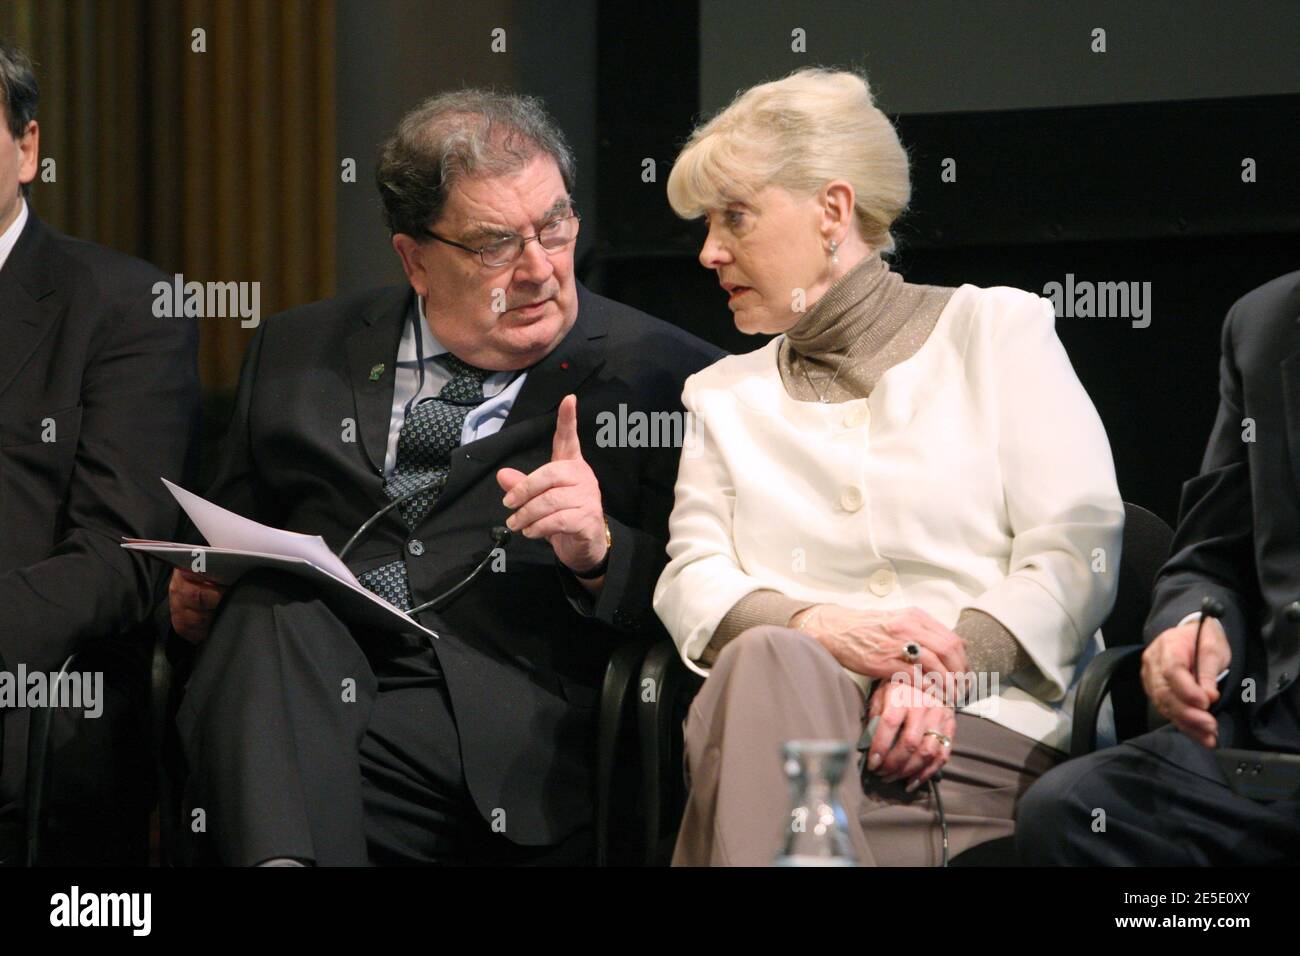 Nobel Peace Prize 1998 John Hume and Nobel Peace Prize 1976 Betty Williams attending the 9th World Summit of Nobel Peace Laureates, held at the Hotel de Ville of Paris, France, on December 11, 2008. Photo by Malkon/ABACAPRESS.COM Stock Photo